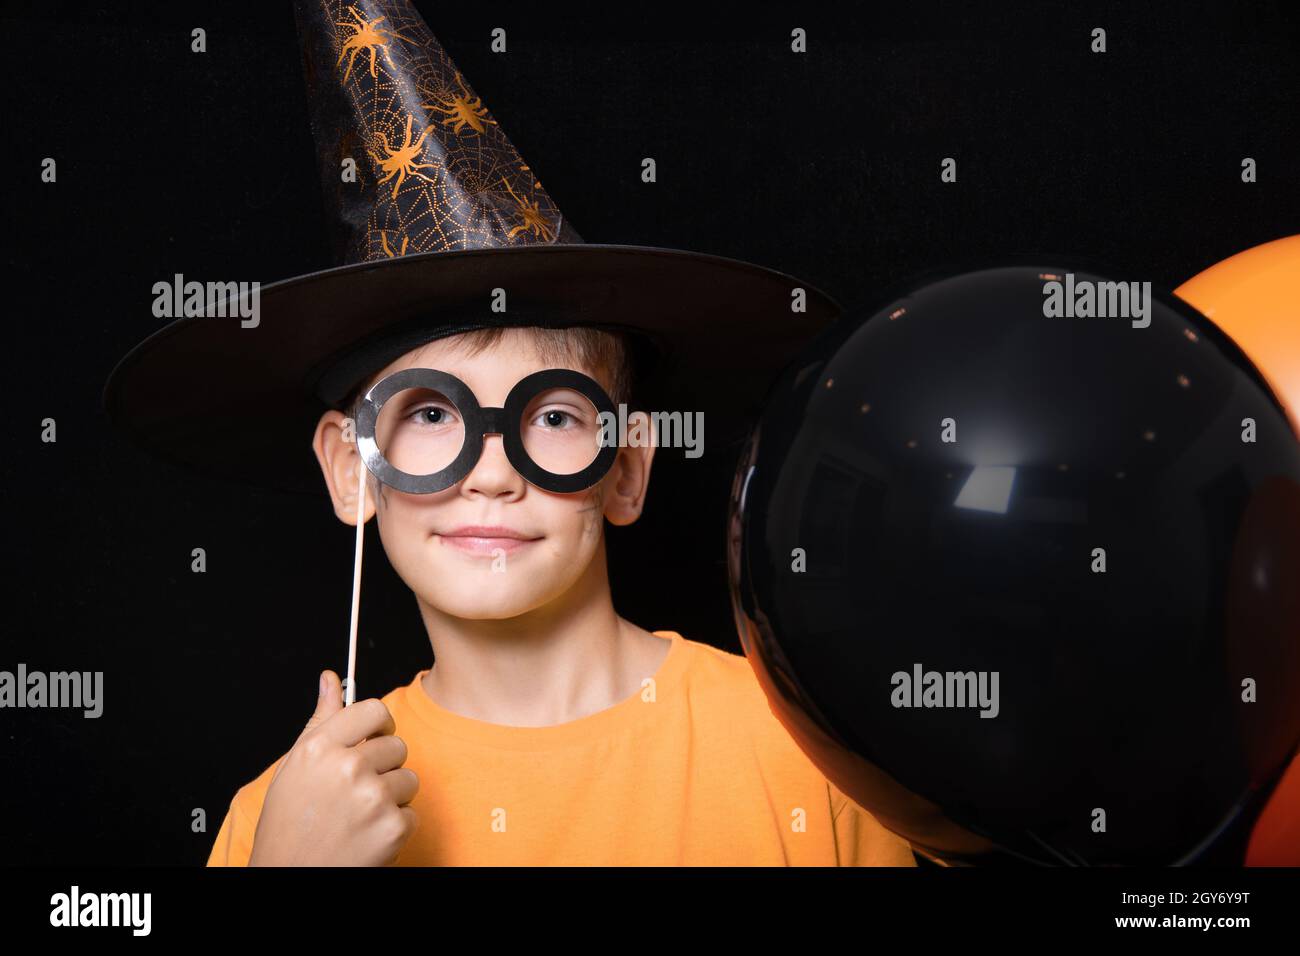 Halloween kids. A boy in a magician's hat and with a mask of black glasses holding orange and black balloons on a black background. Ready for the holi Stock Photo